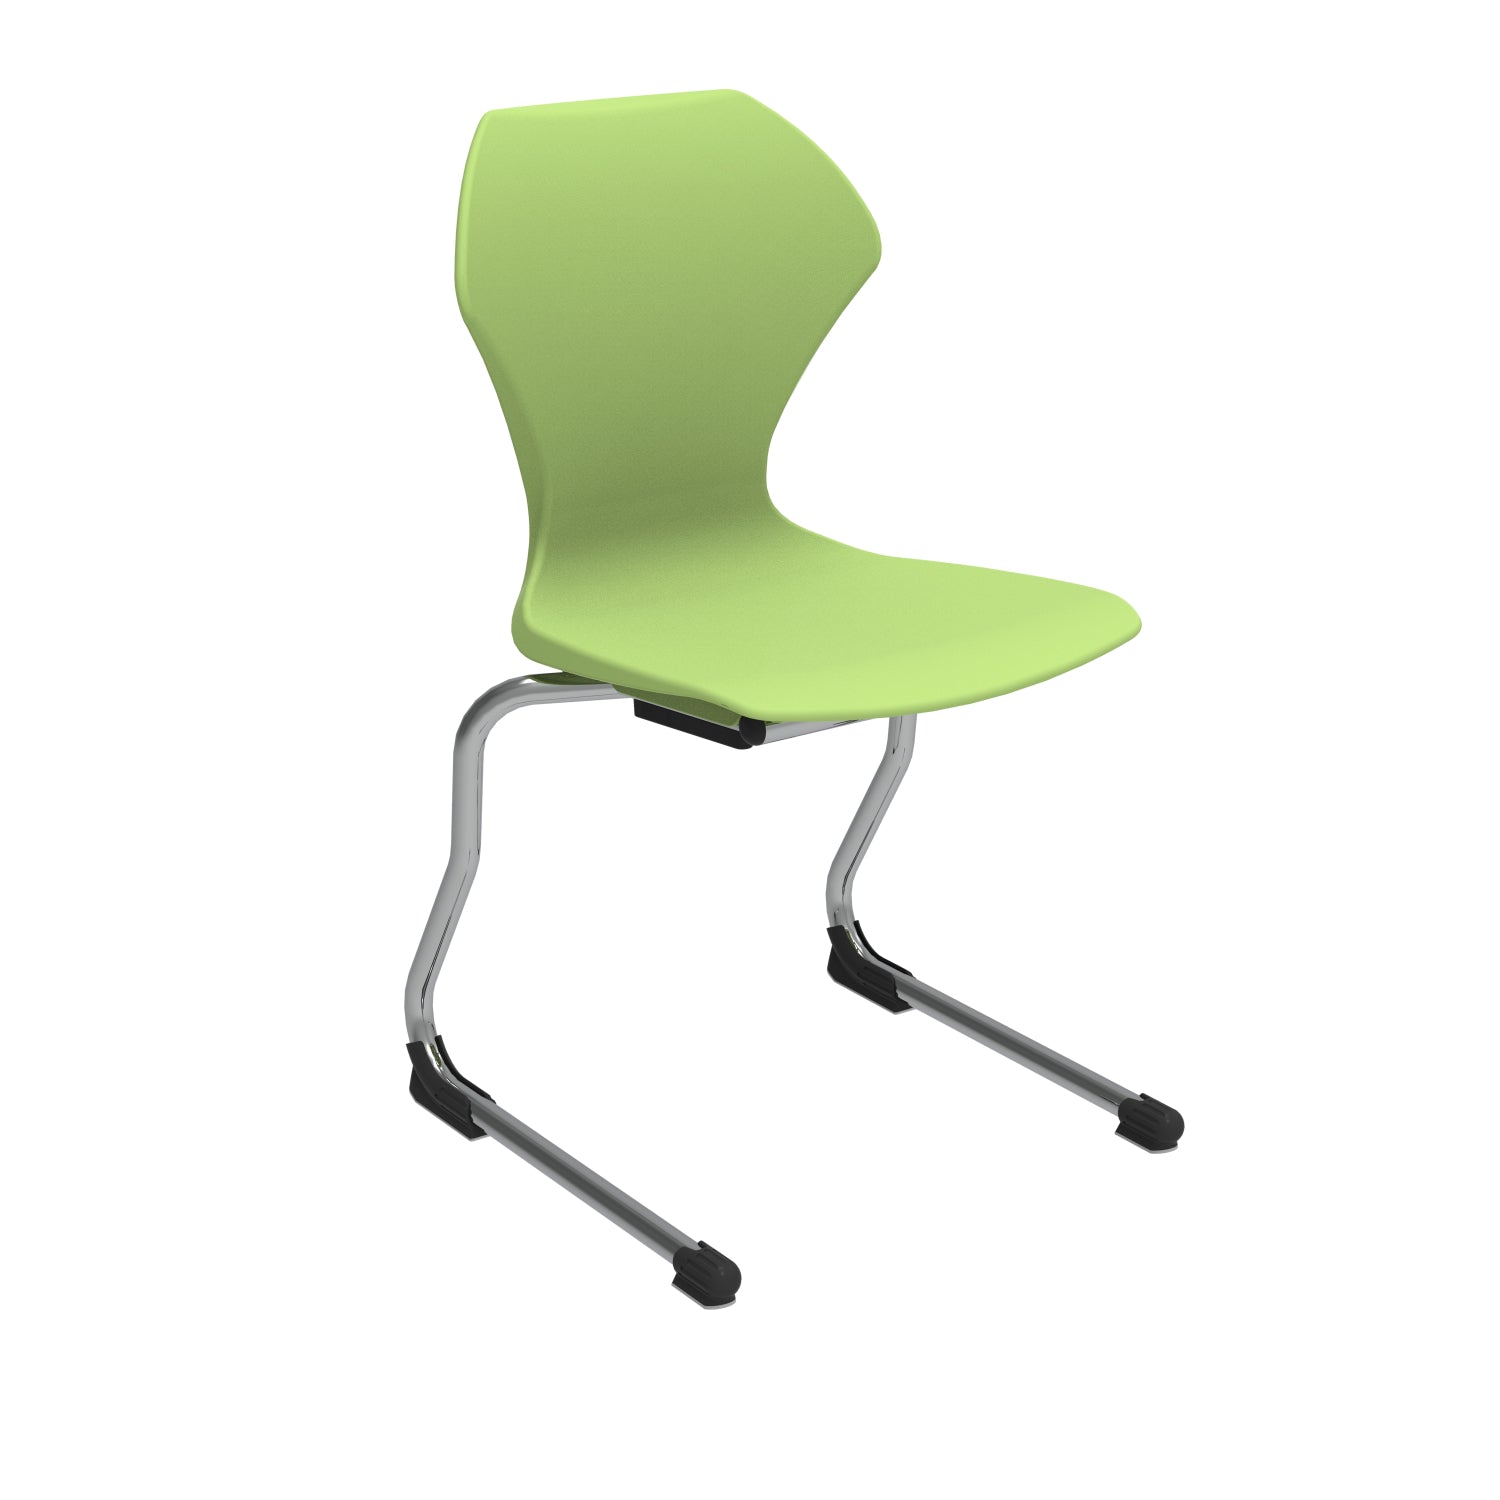 Apex Cantilever Stacking Chair, Chrome Frame, 18" Seat Height